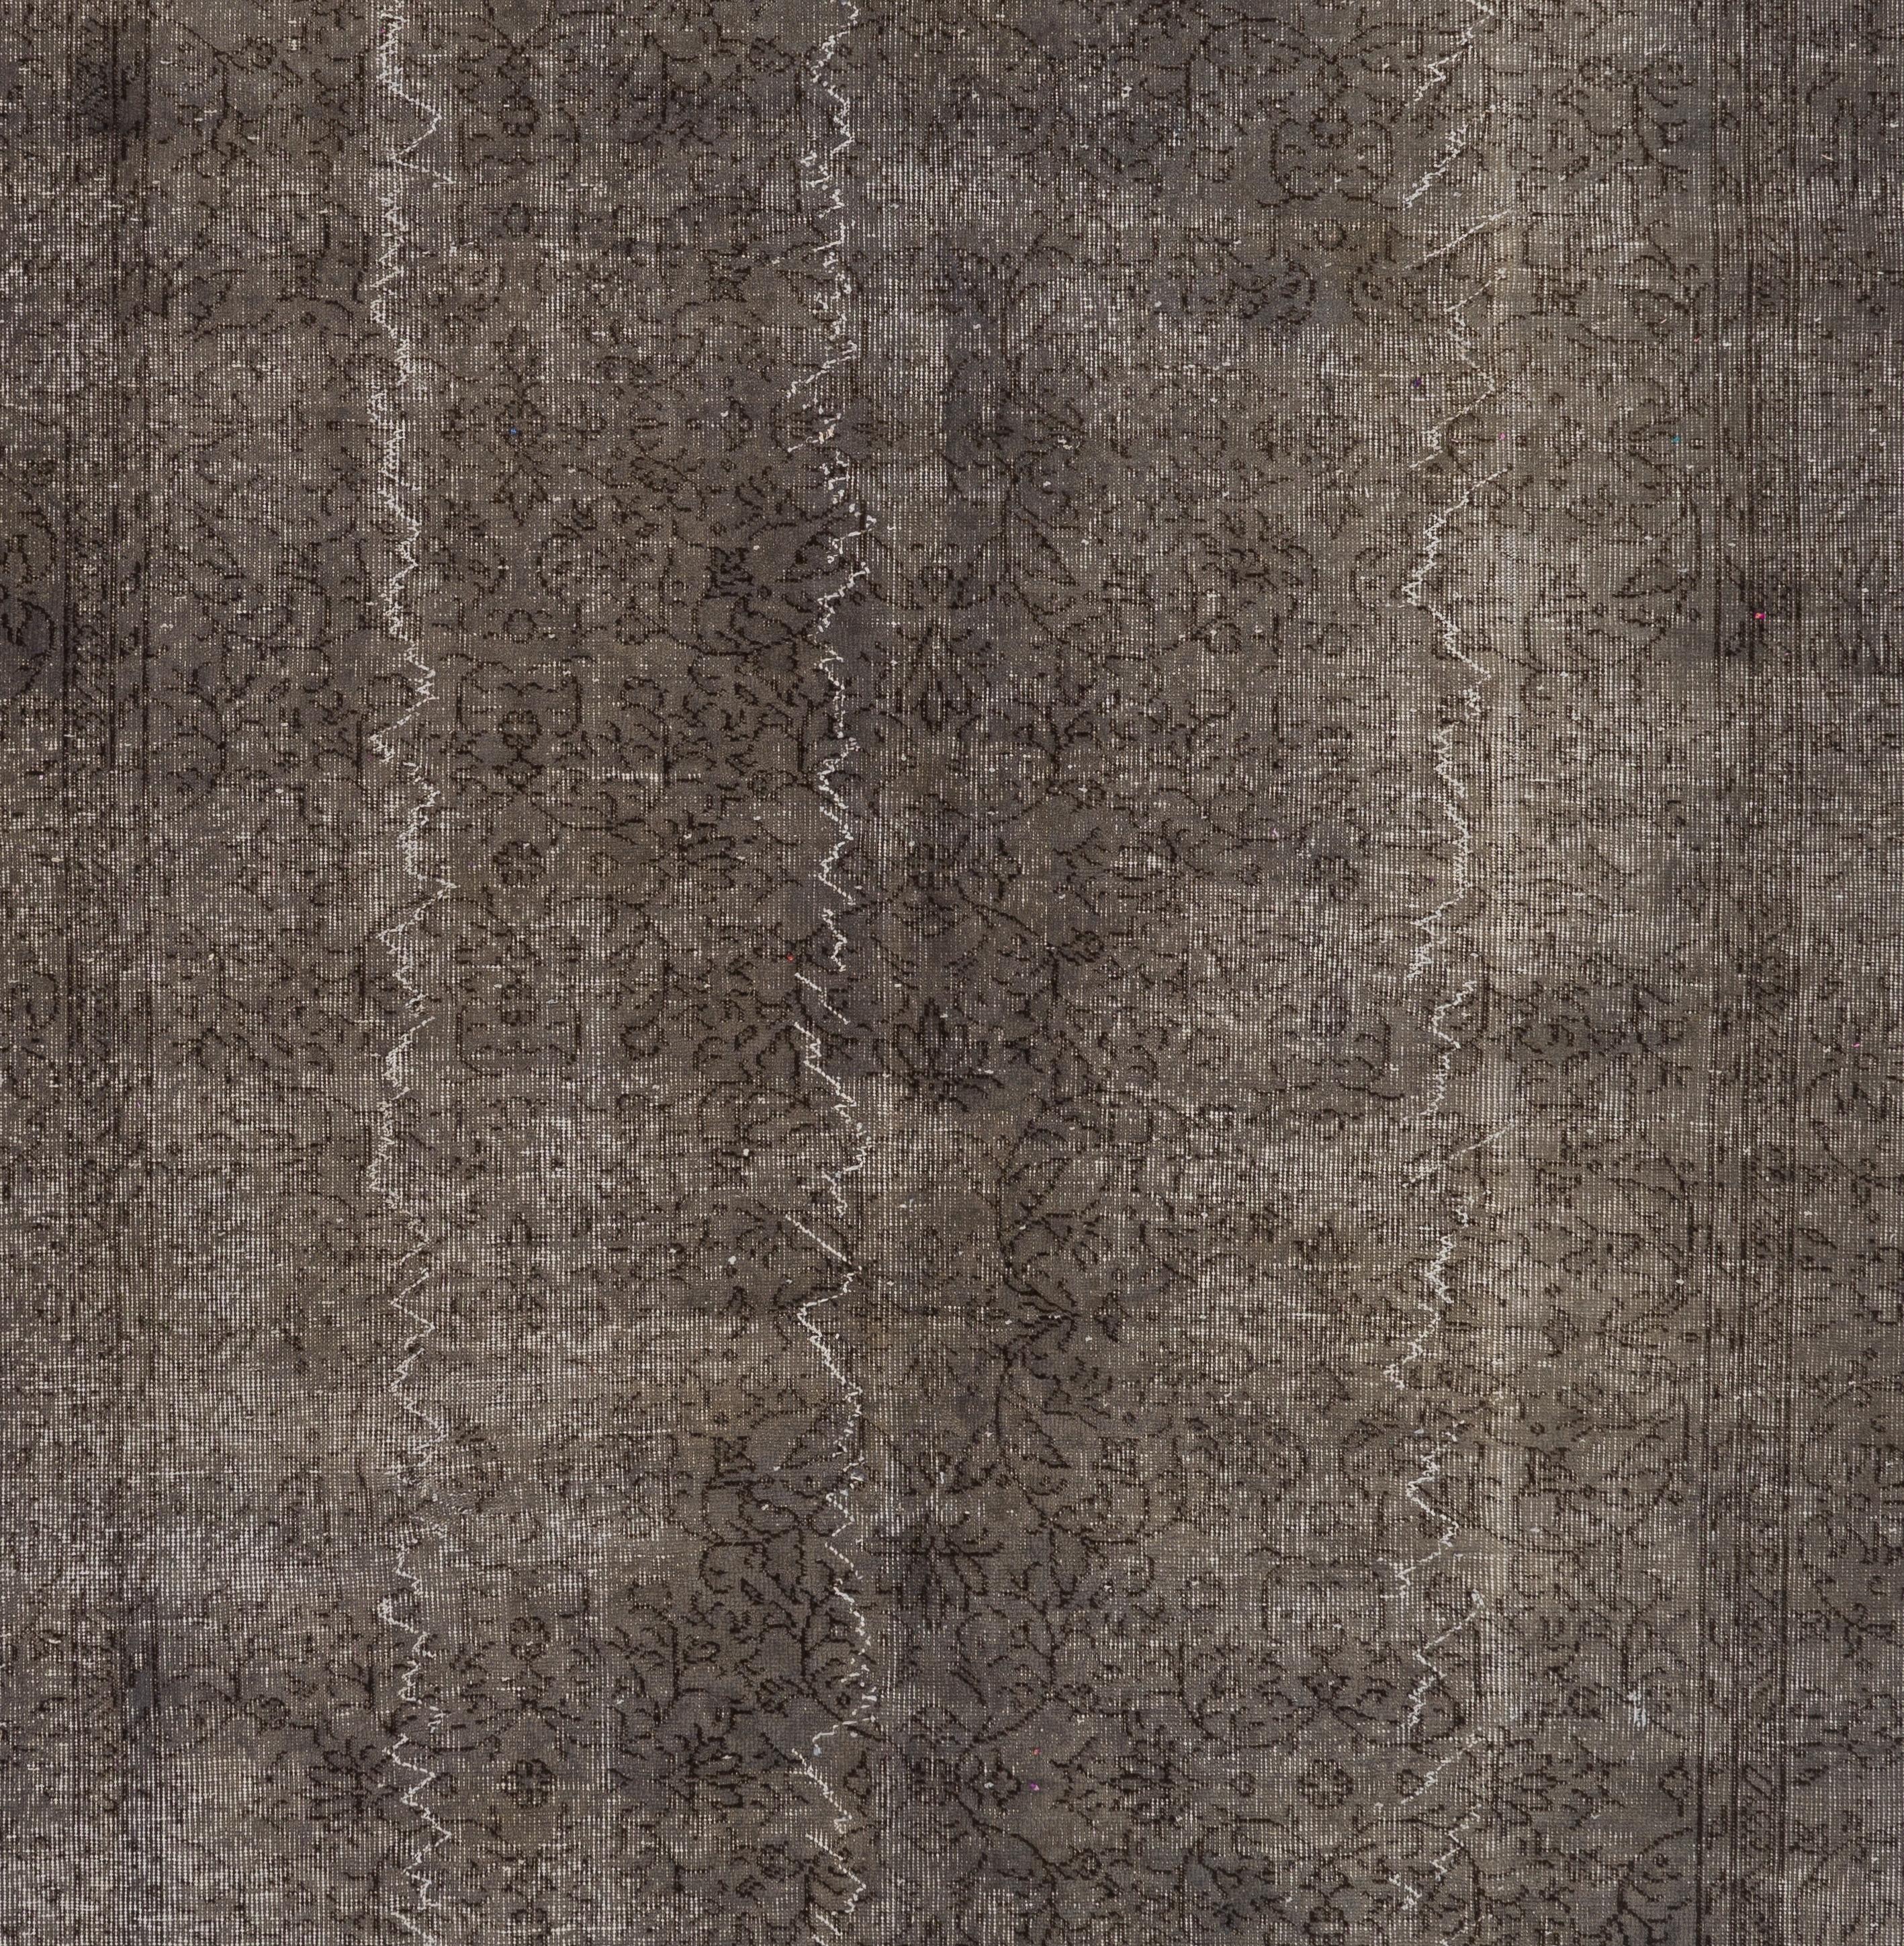 6.5x9.7 Ft Distressed Handmade Rug. Modern Gray Carpet. Turkish Floor Covering In Good Condition For Sale In Philadelphia, PA